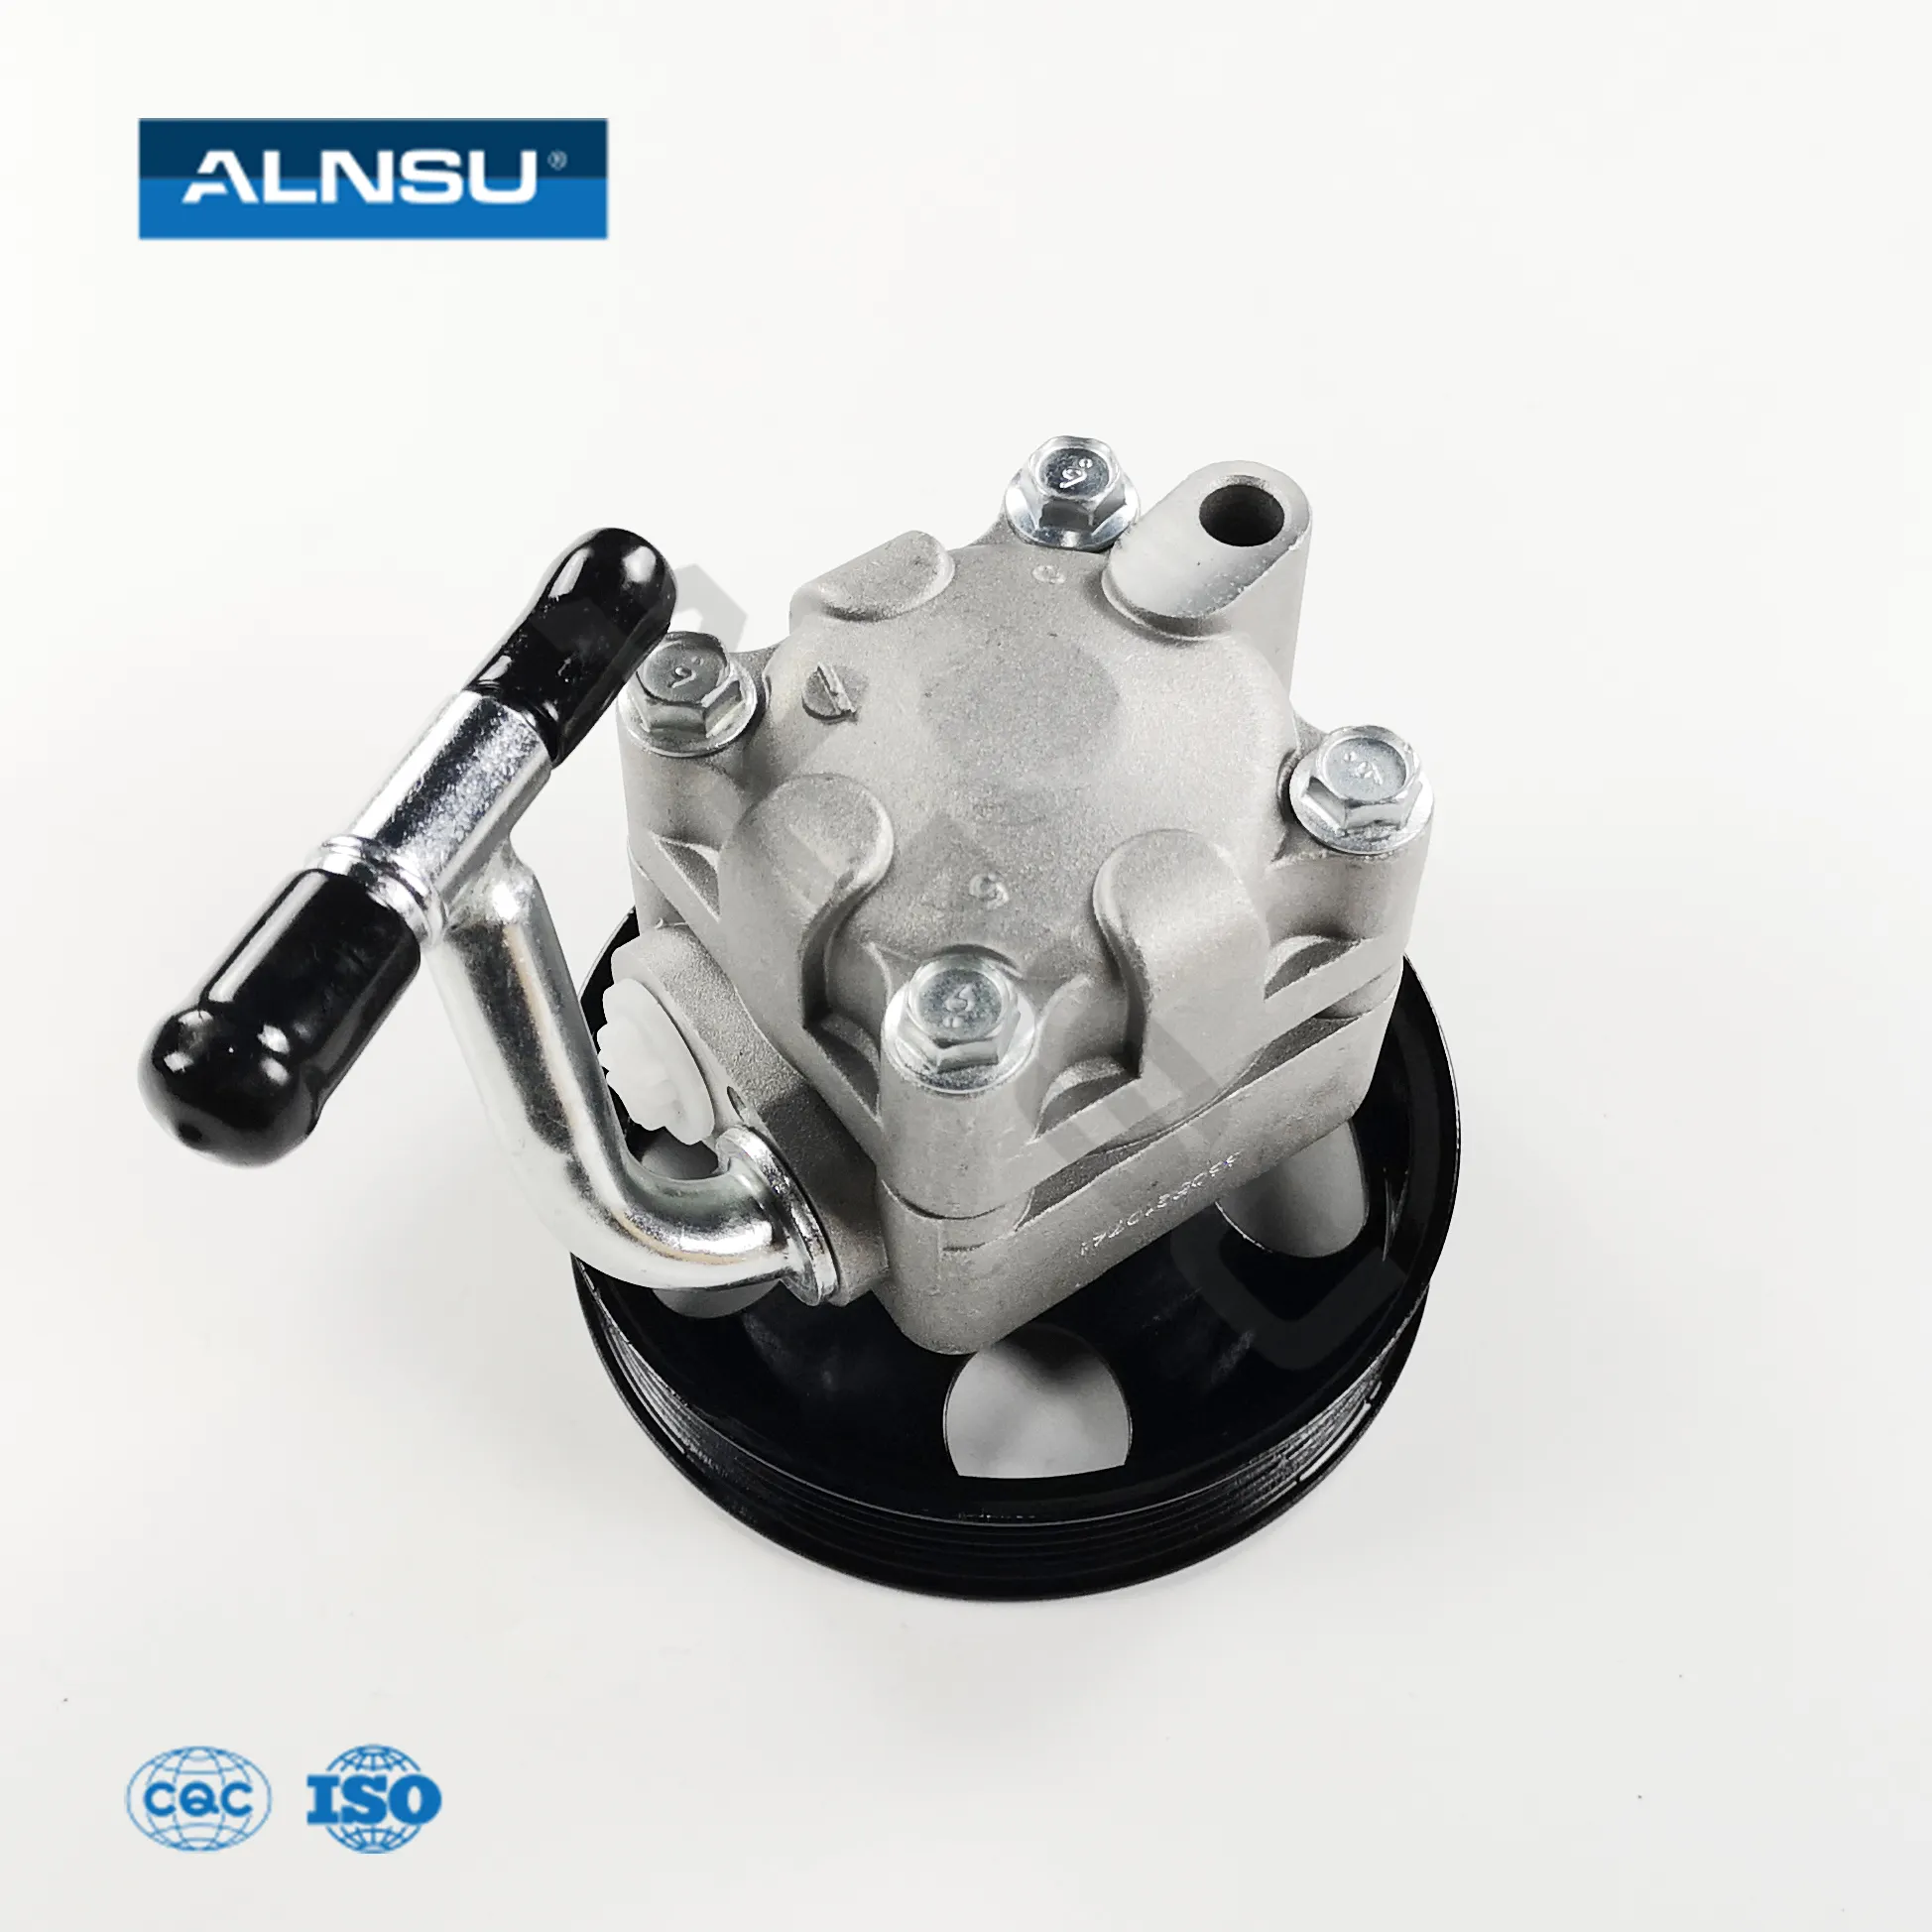 Hot sell Hight quality Auto Steering Systems Power Steering Pump FOR Nissan ELGRAND E51 NE51 VQ35 49110-WL005